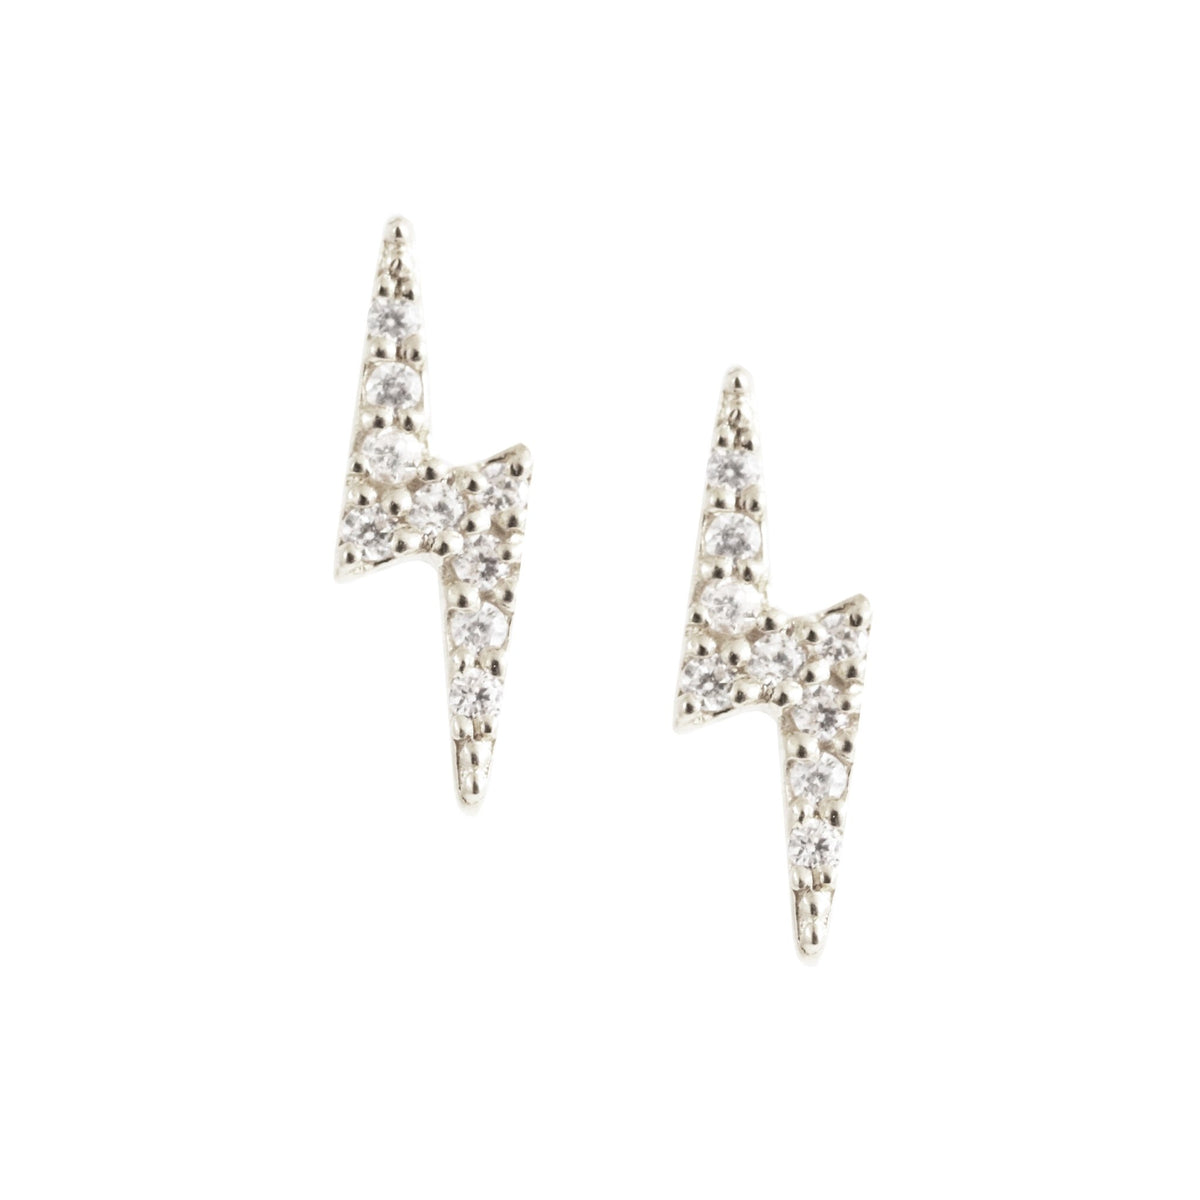 LOVE LIGHTNING STUDS - CUBIC ZIRCONIA &amp; SILVER - SO PRETTY CARA COTTER